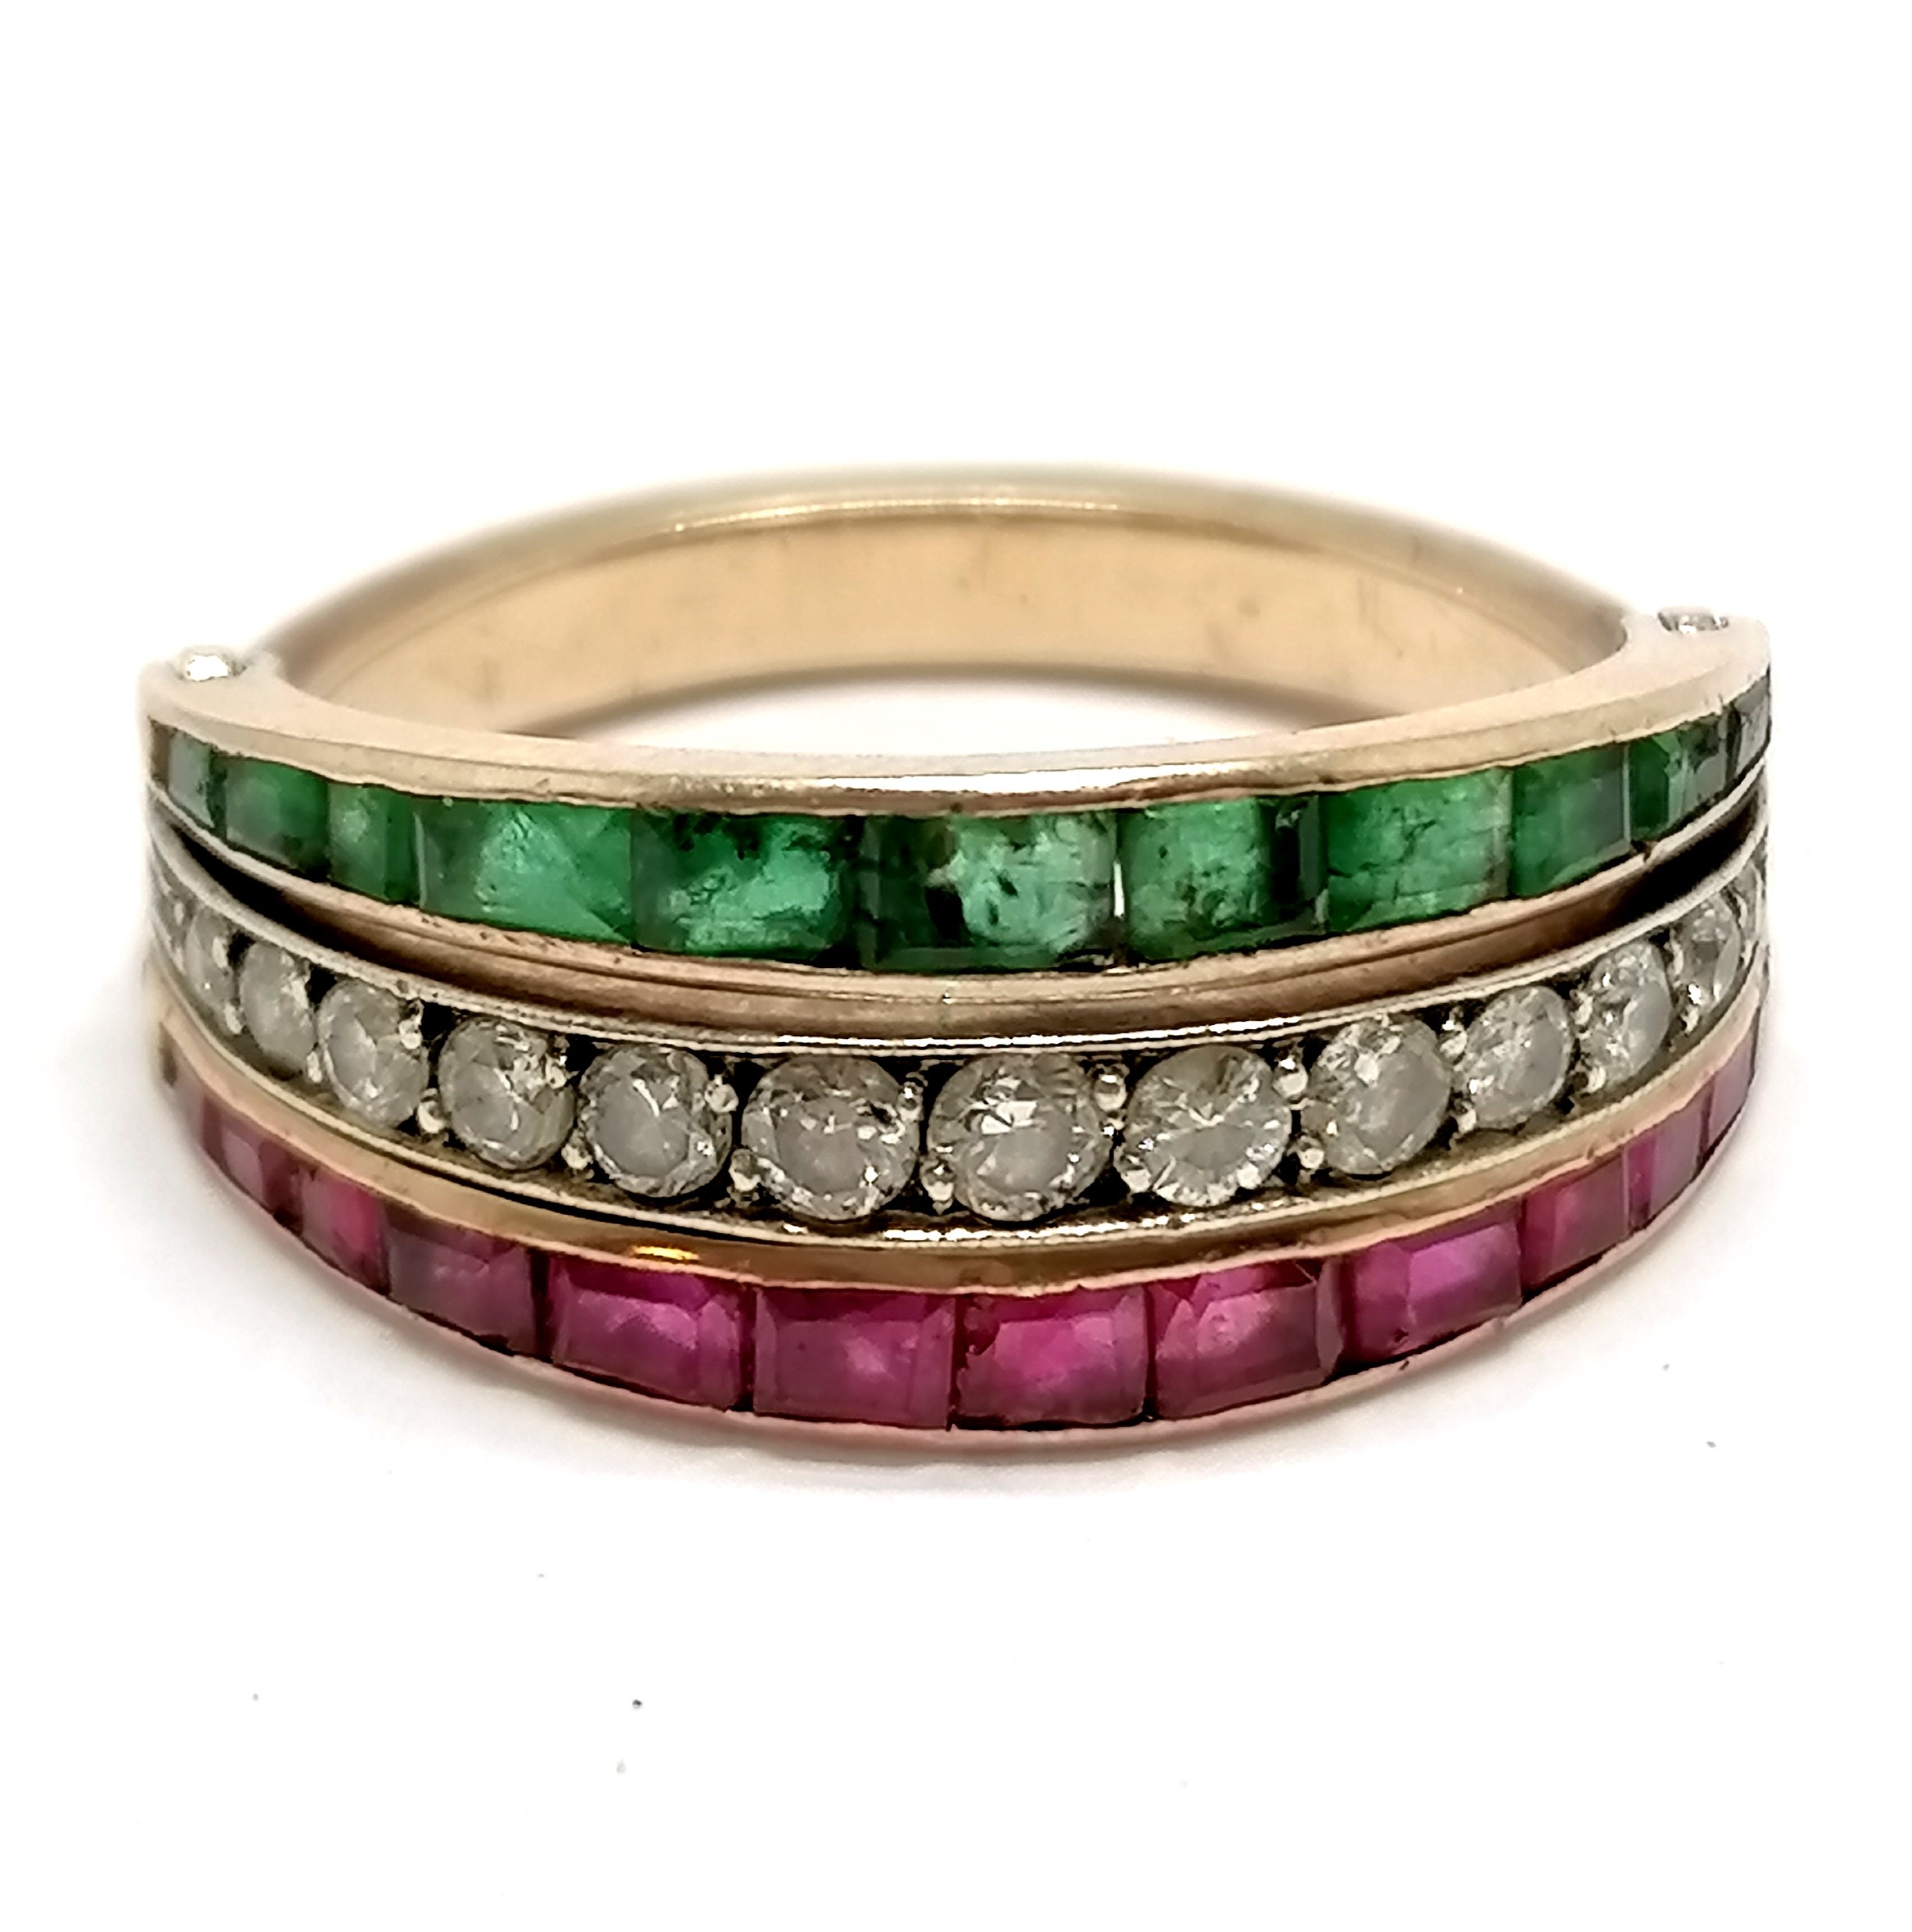 Unmarked gold reversible / flip over ring channel set with diamond / ruby / emerald - size R½ & 5.3g - Image 2 of 4